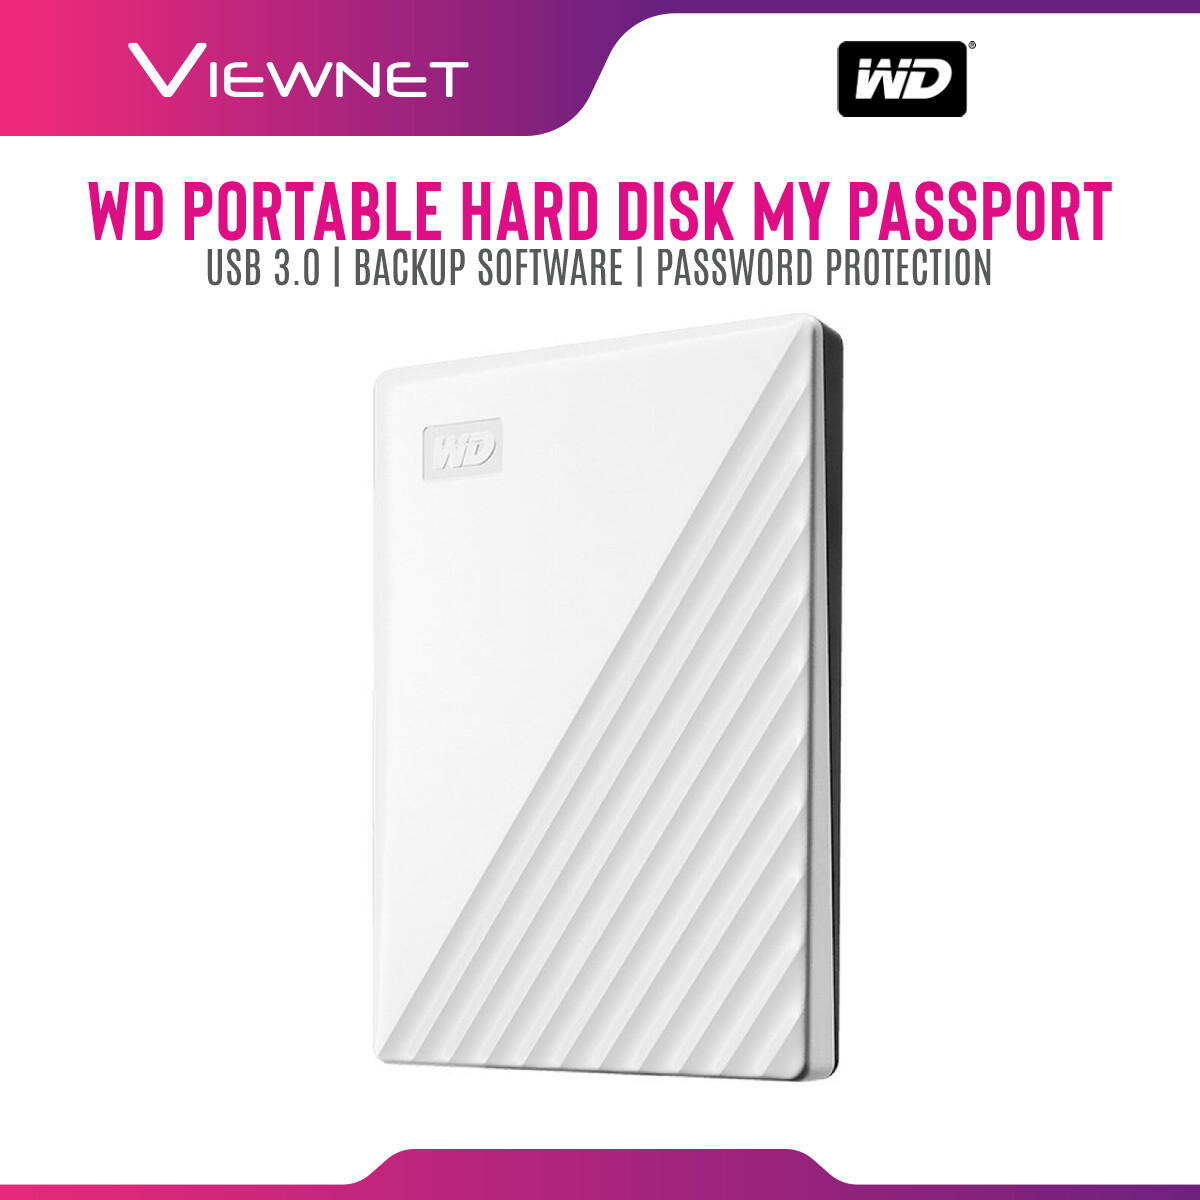 WD Western Digital My Passport 2TB ( WHITE ) Slim Portable External Hard Disk USB 3.0 With WD Backup Software & Password Protection